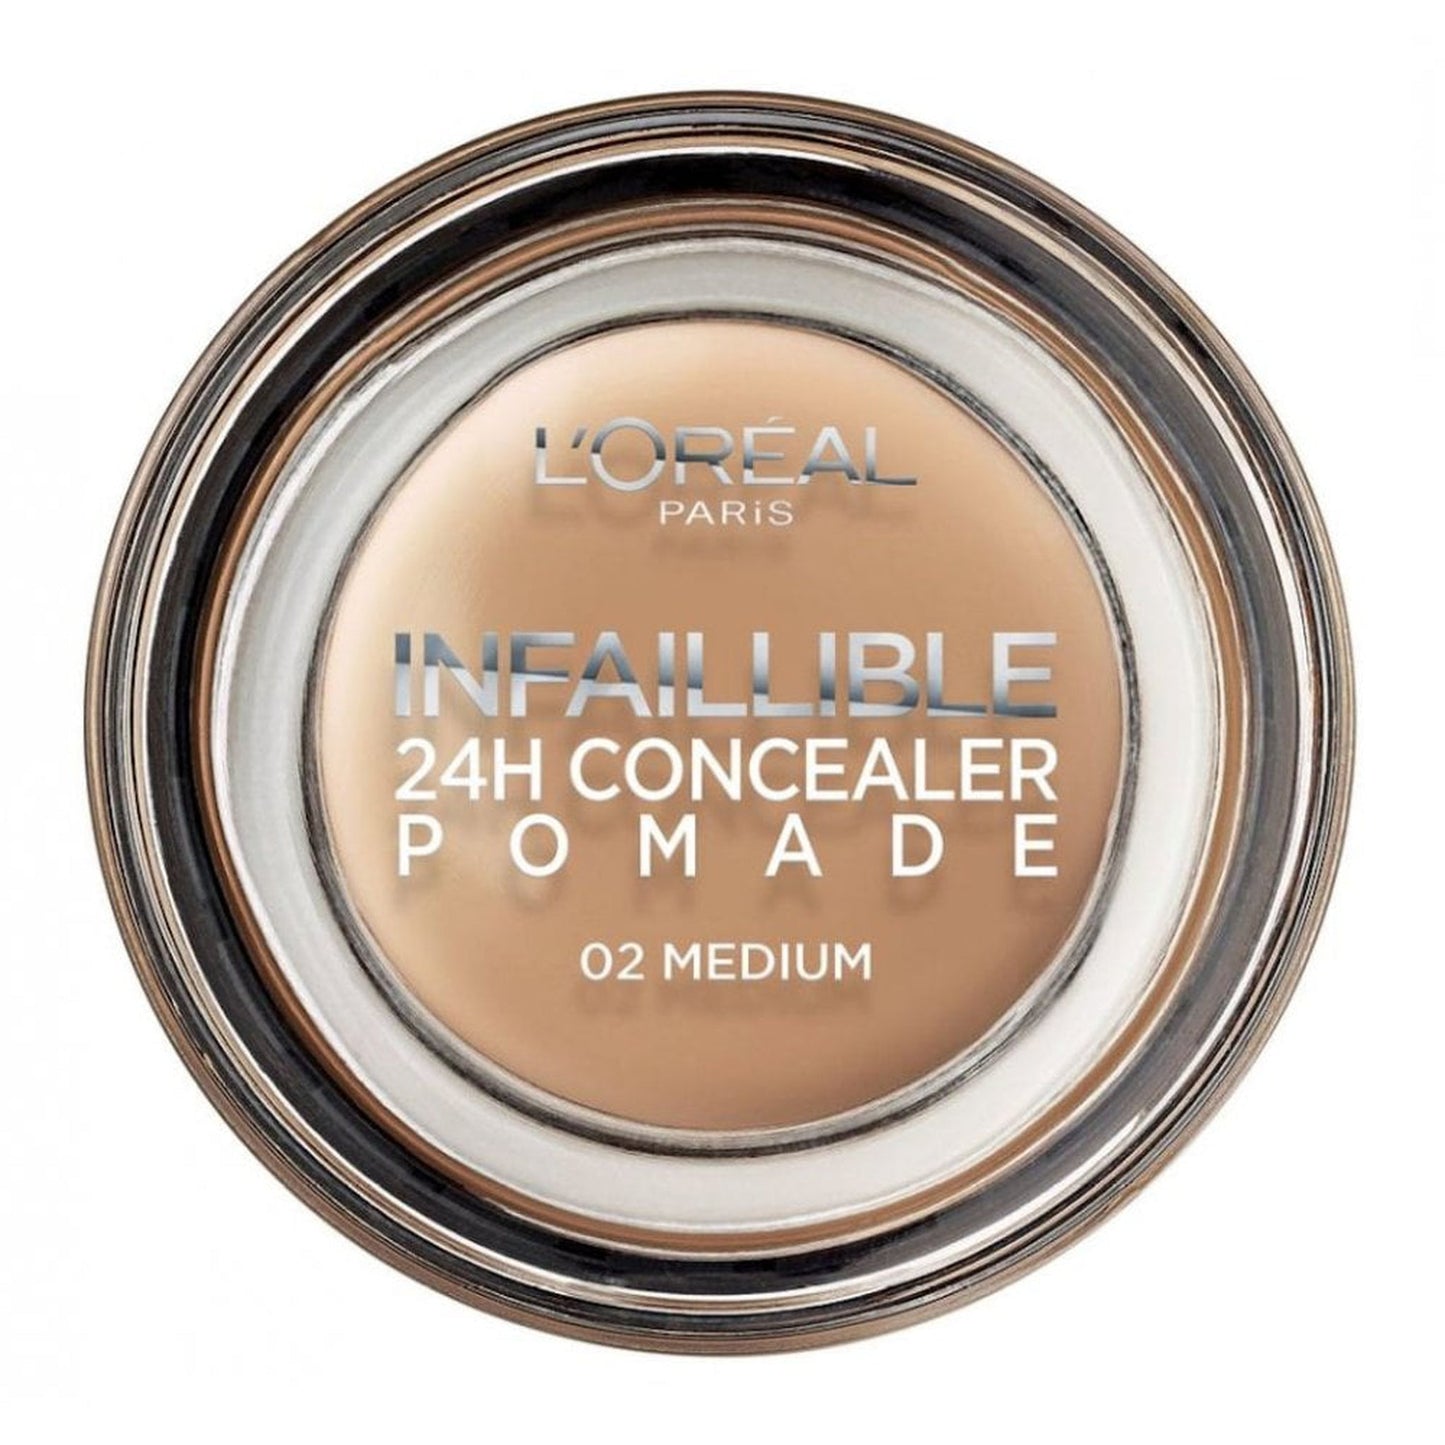 L'Oreal Infallible 24hr Concealer Pomade - 02 Medium-L'Oreal-BeautyNmakeup.co.uk